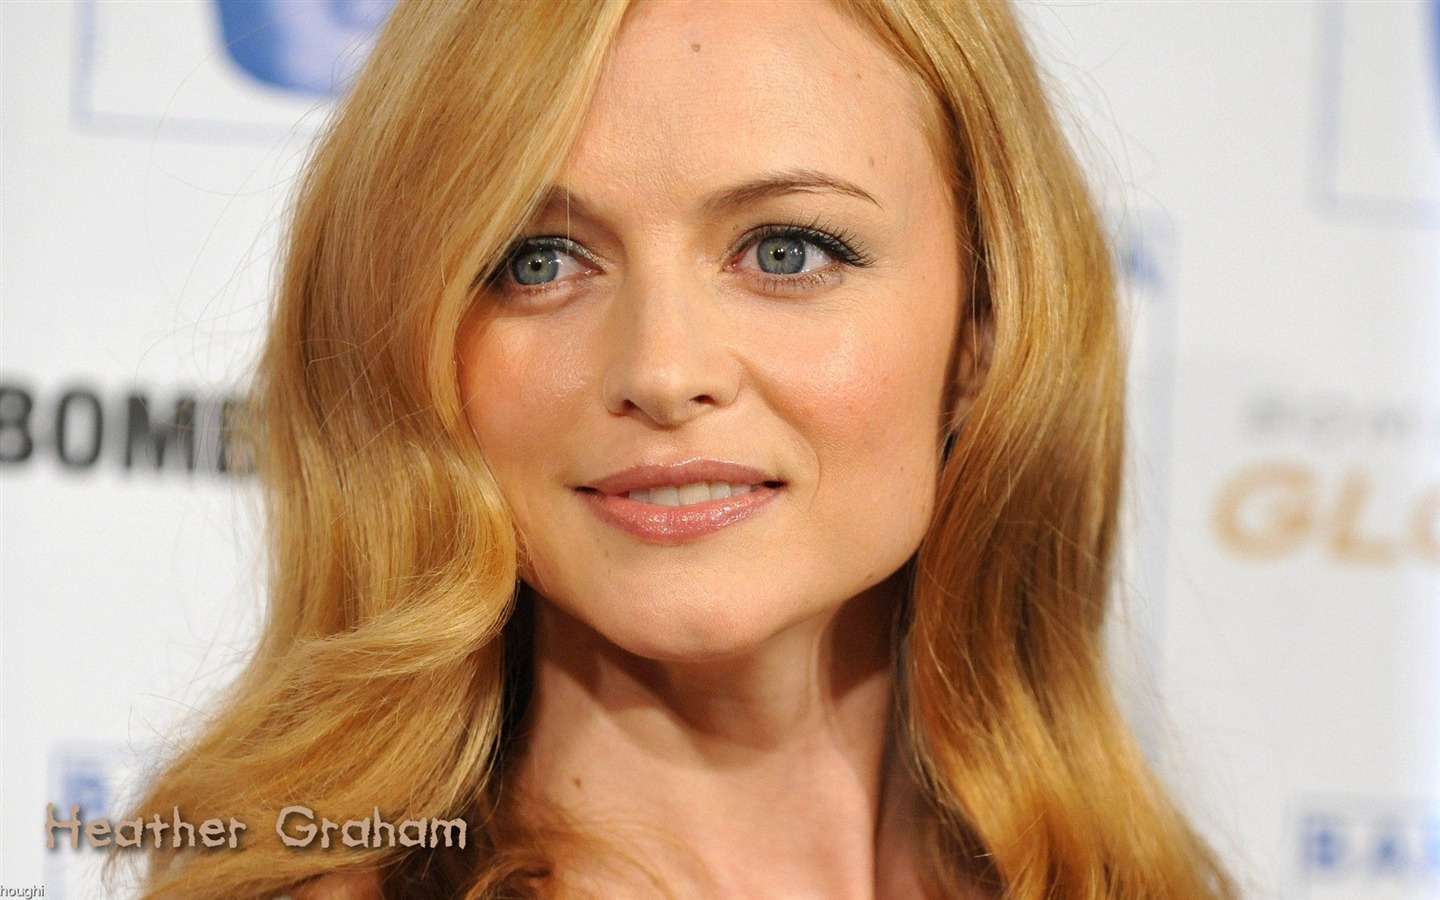 Heather Graham #003 - 1440x900 Wallpapers Pictures Photos Images